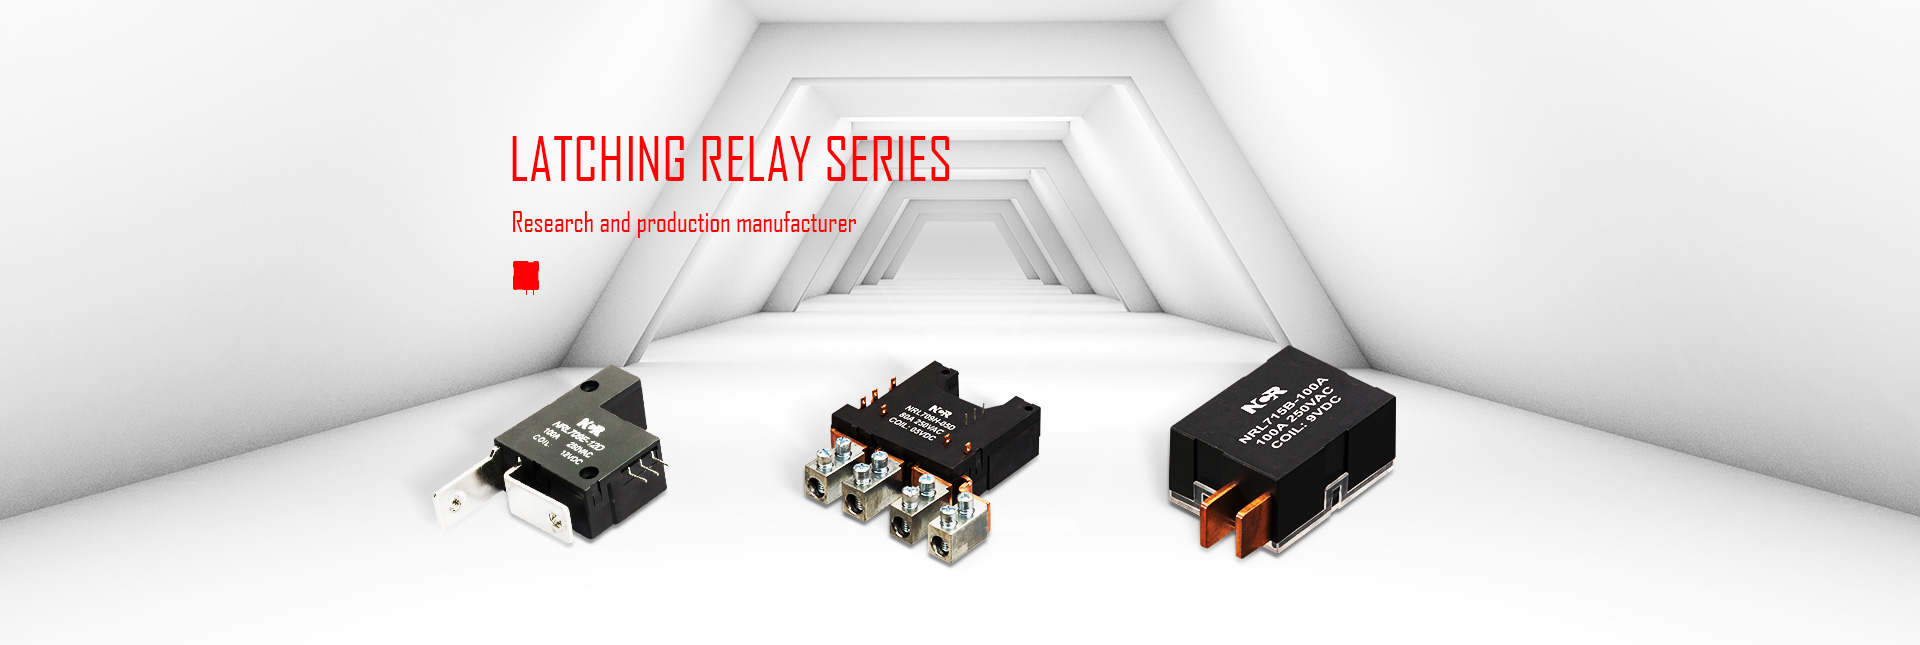 1 Phase Latching Relay